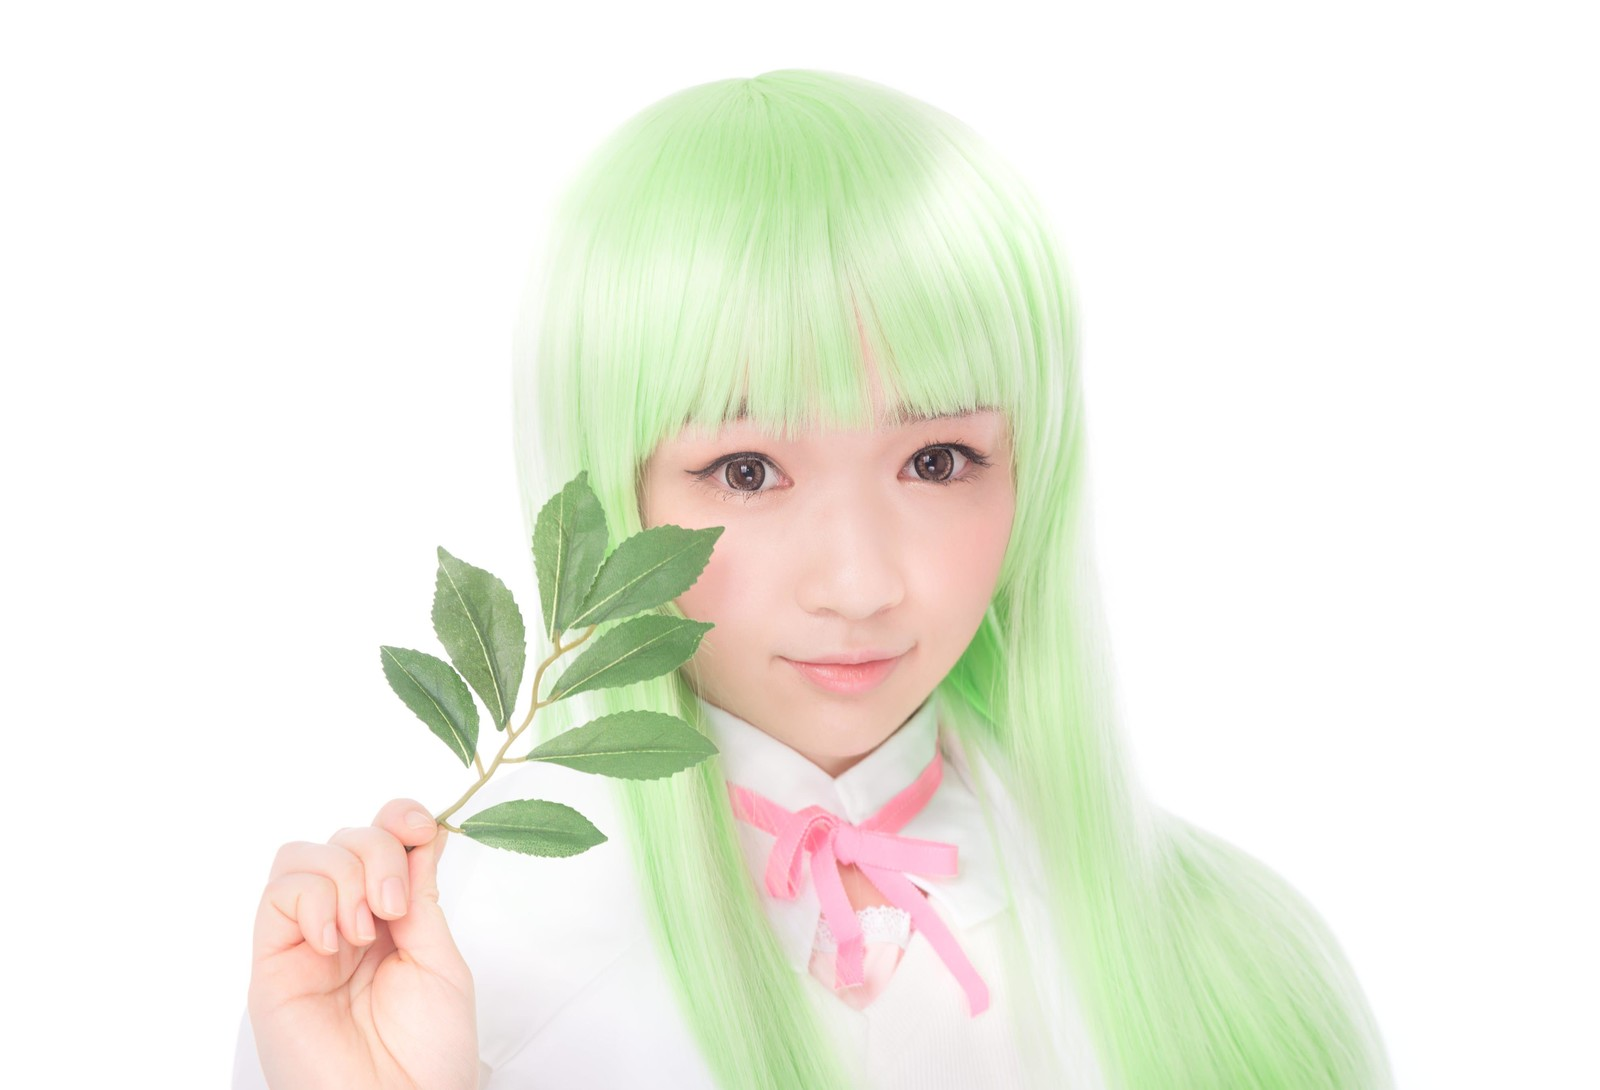 Anime Zodiac Signs - The Signs as Green-Haired Characters! - Wattpad